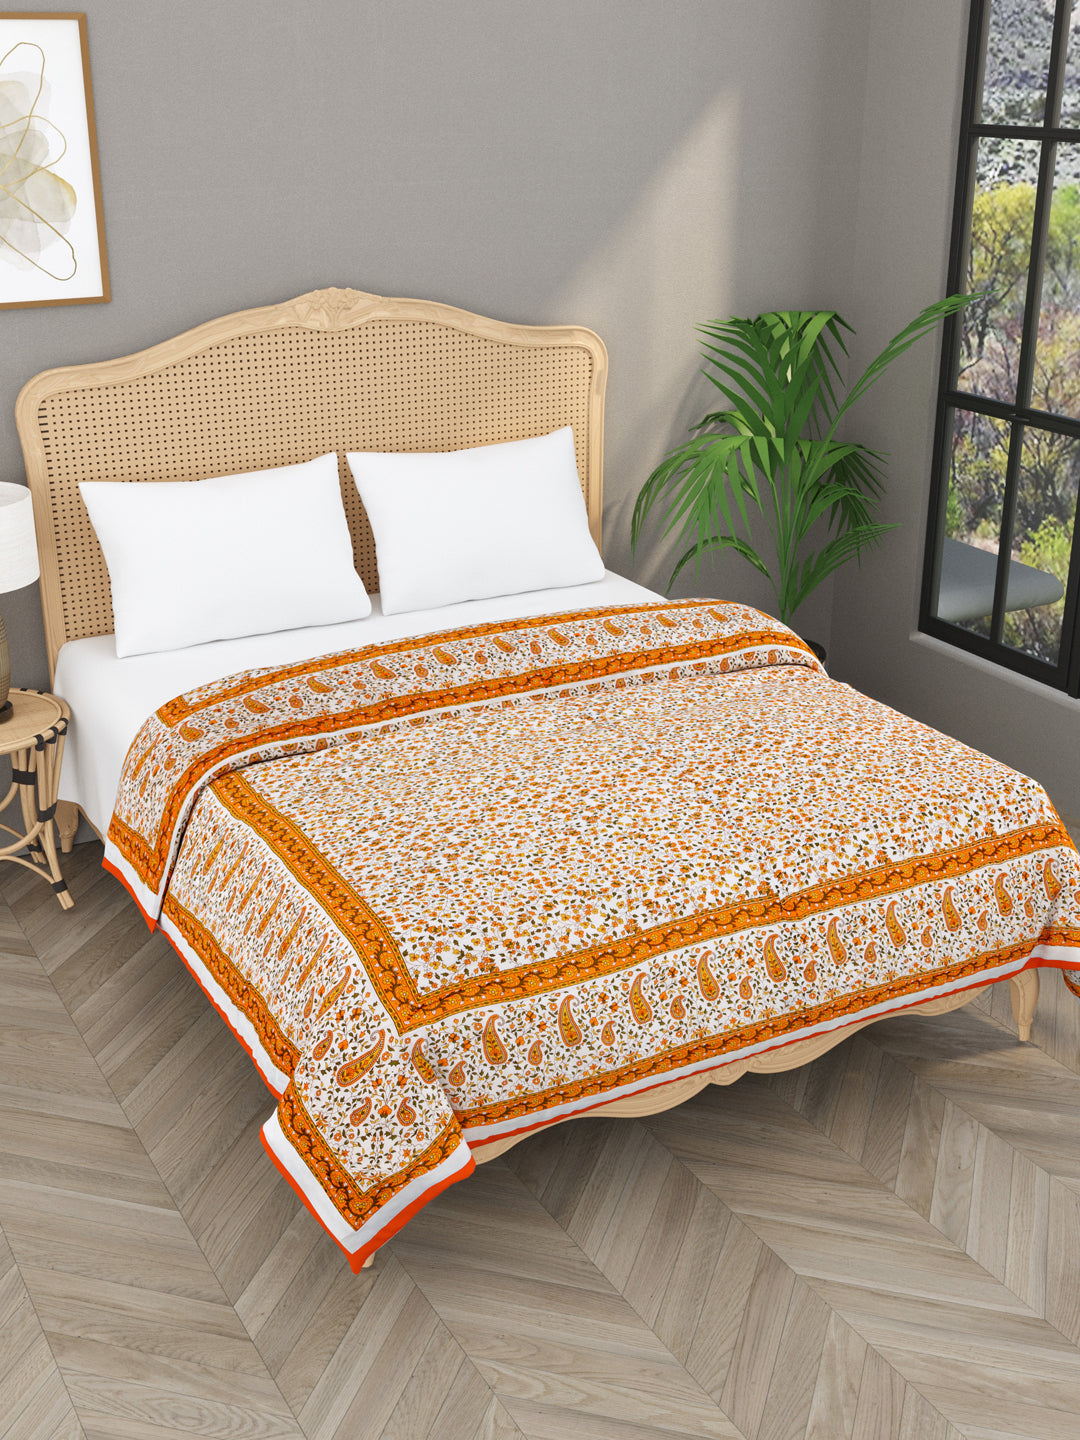 Floral Printed Double Bed Cotton Quilt with cotton filling